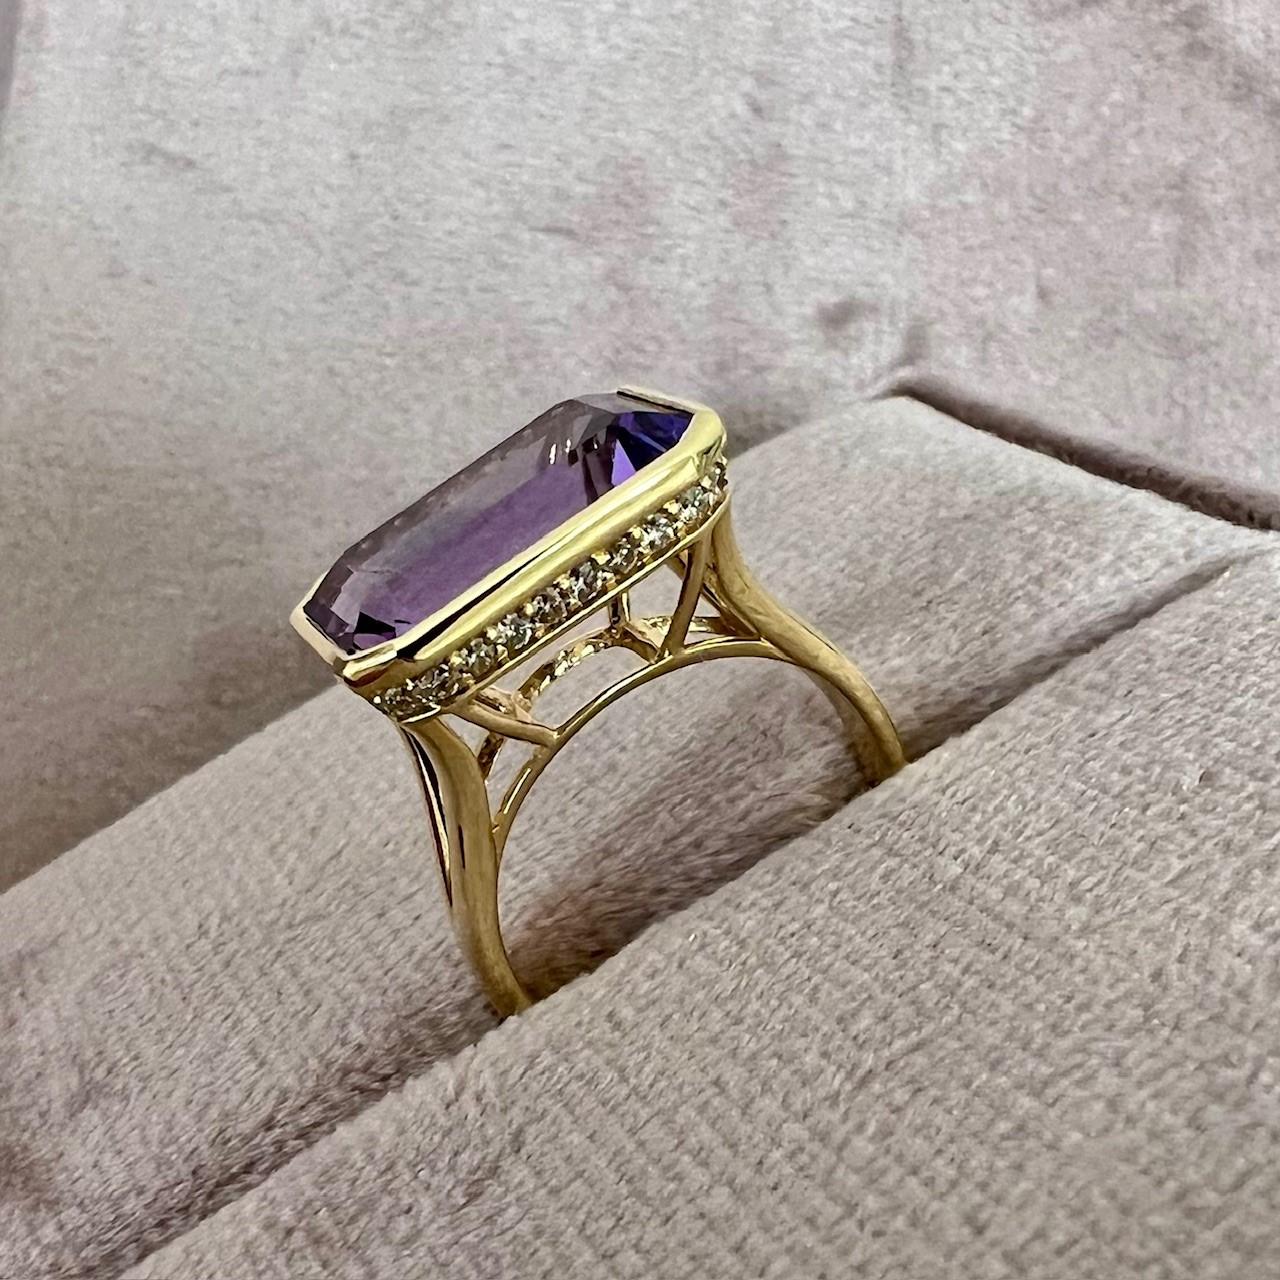 Created in 18 karat yellow gold
Amethyst 7 carats approx.
Diamonds 0.35 carat approx.
Ring size US 6.5, can be sized
Limited edition

Crafted from 18 karat yellow gold, this limited edition ring showcases a stunning 7 carat amethyst, accentuated